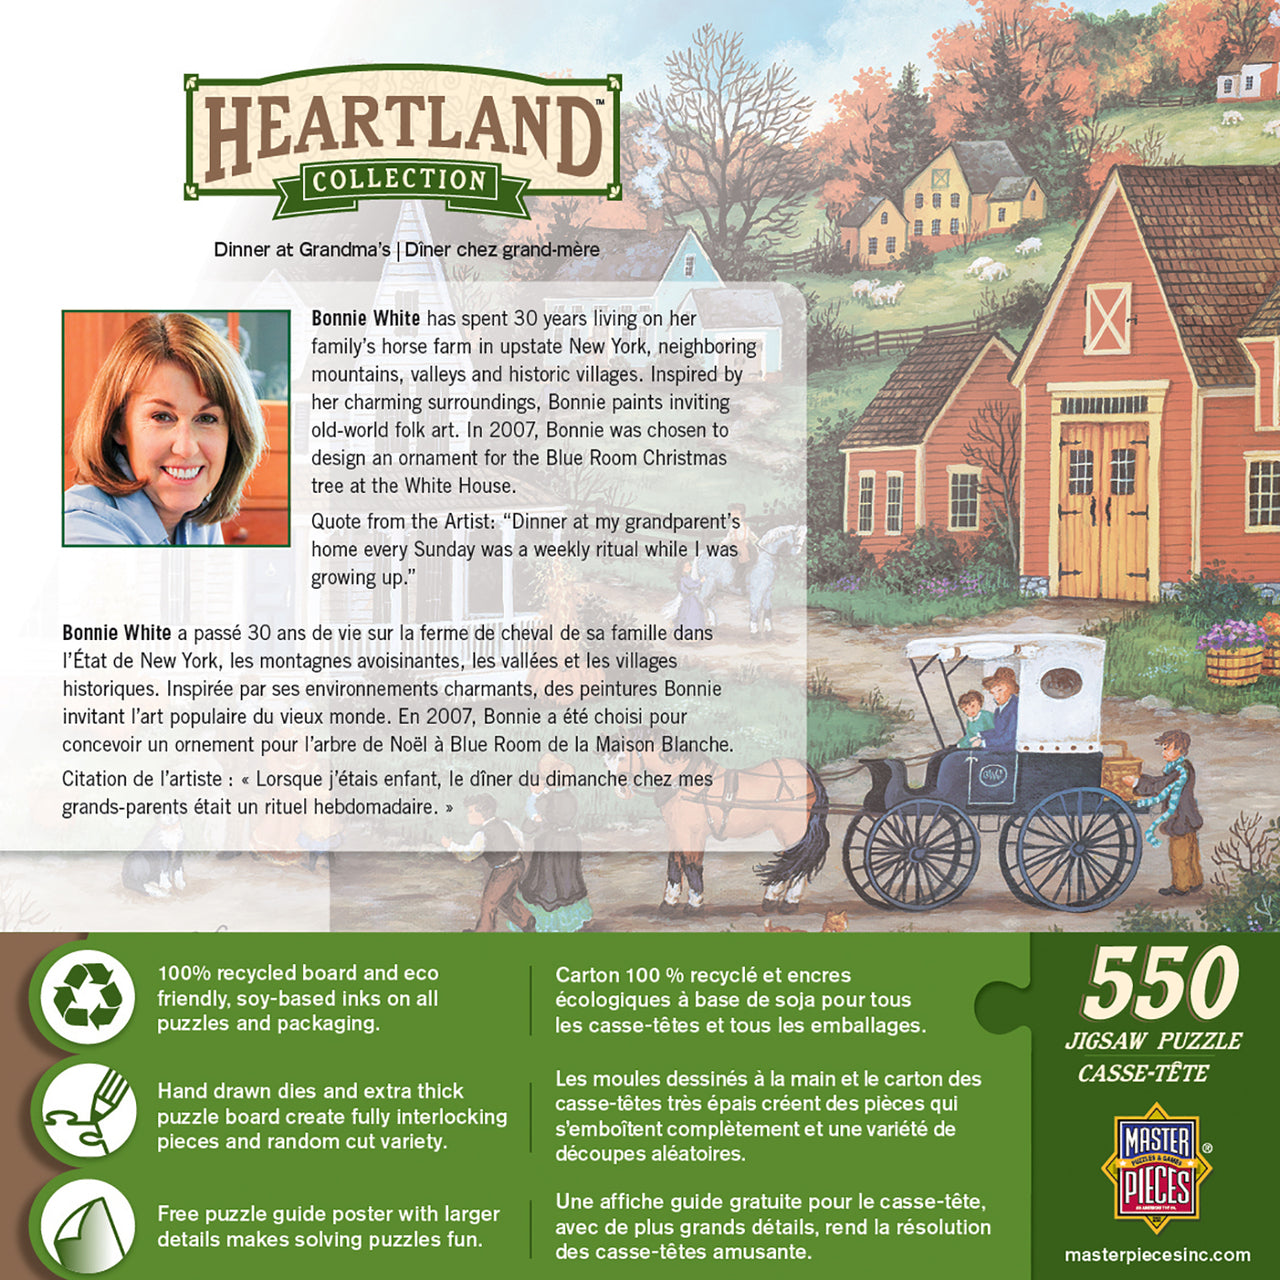 Heartland Collection Dinner at Grandmas - 550 Piece Jigsaw Puzzle by Masterpieces